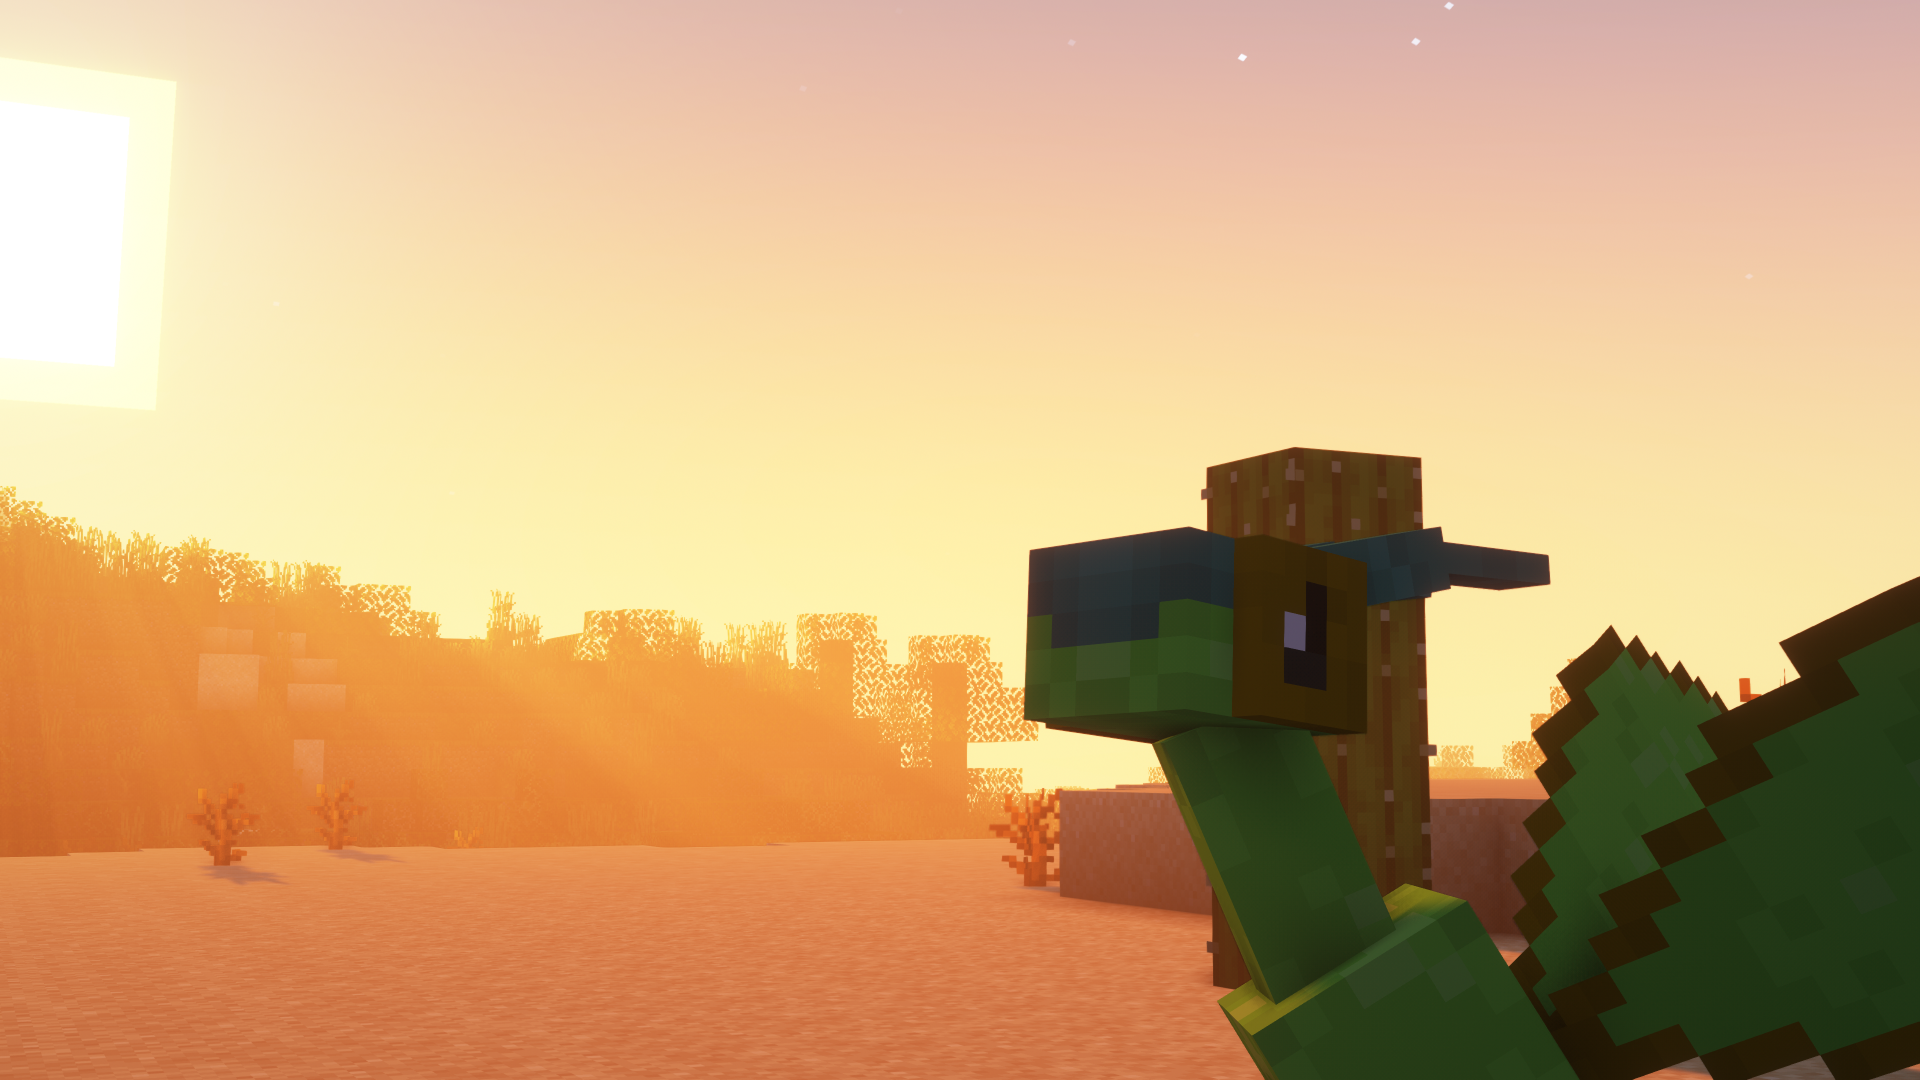 Flygon and the sunset